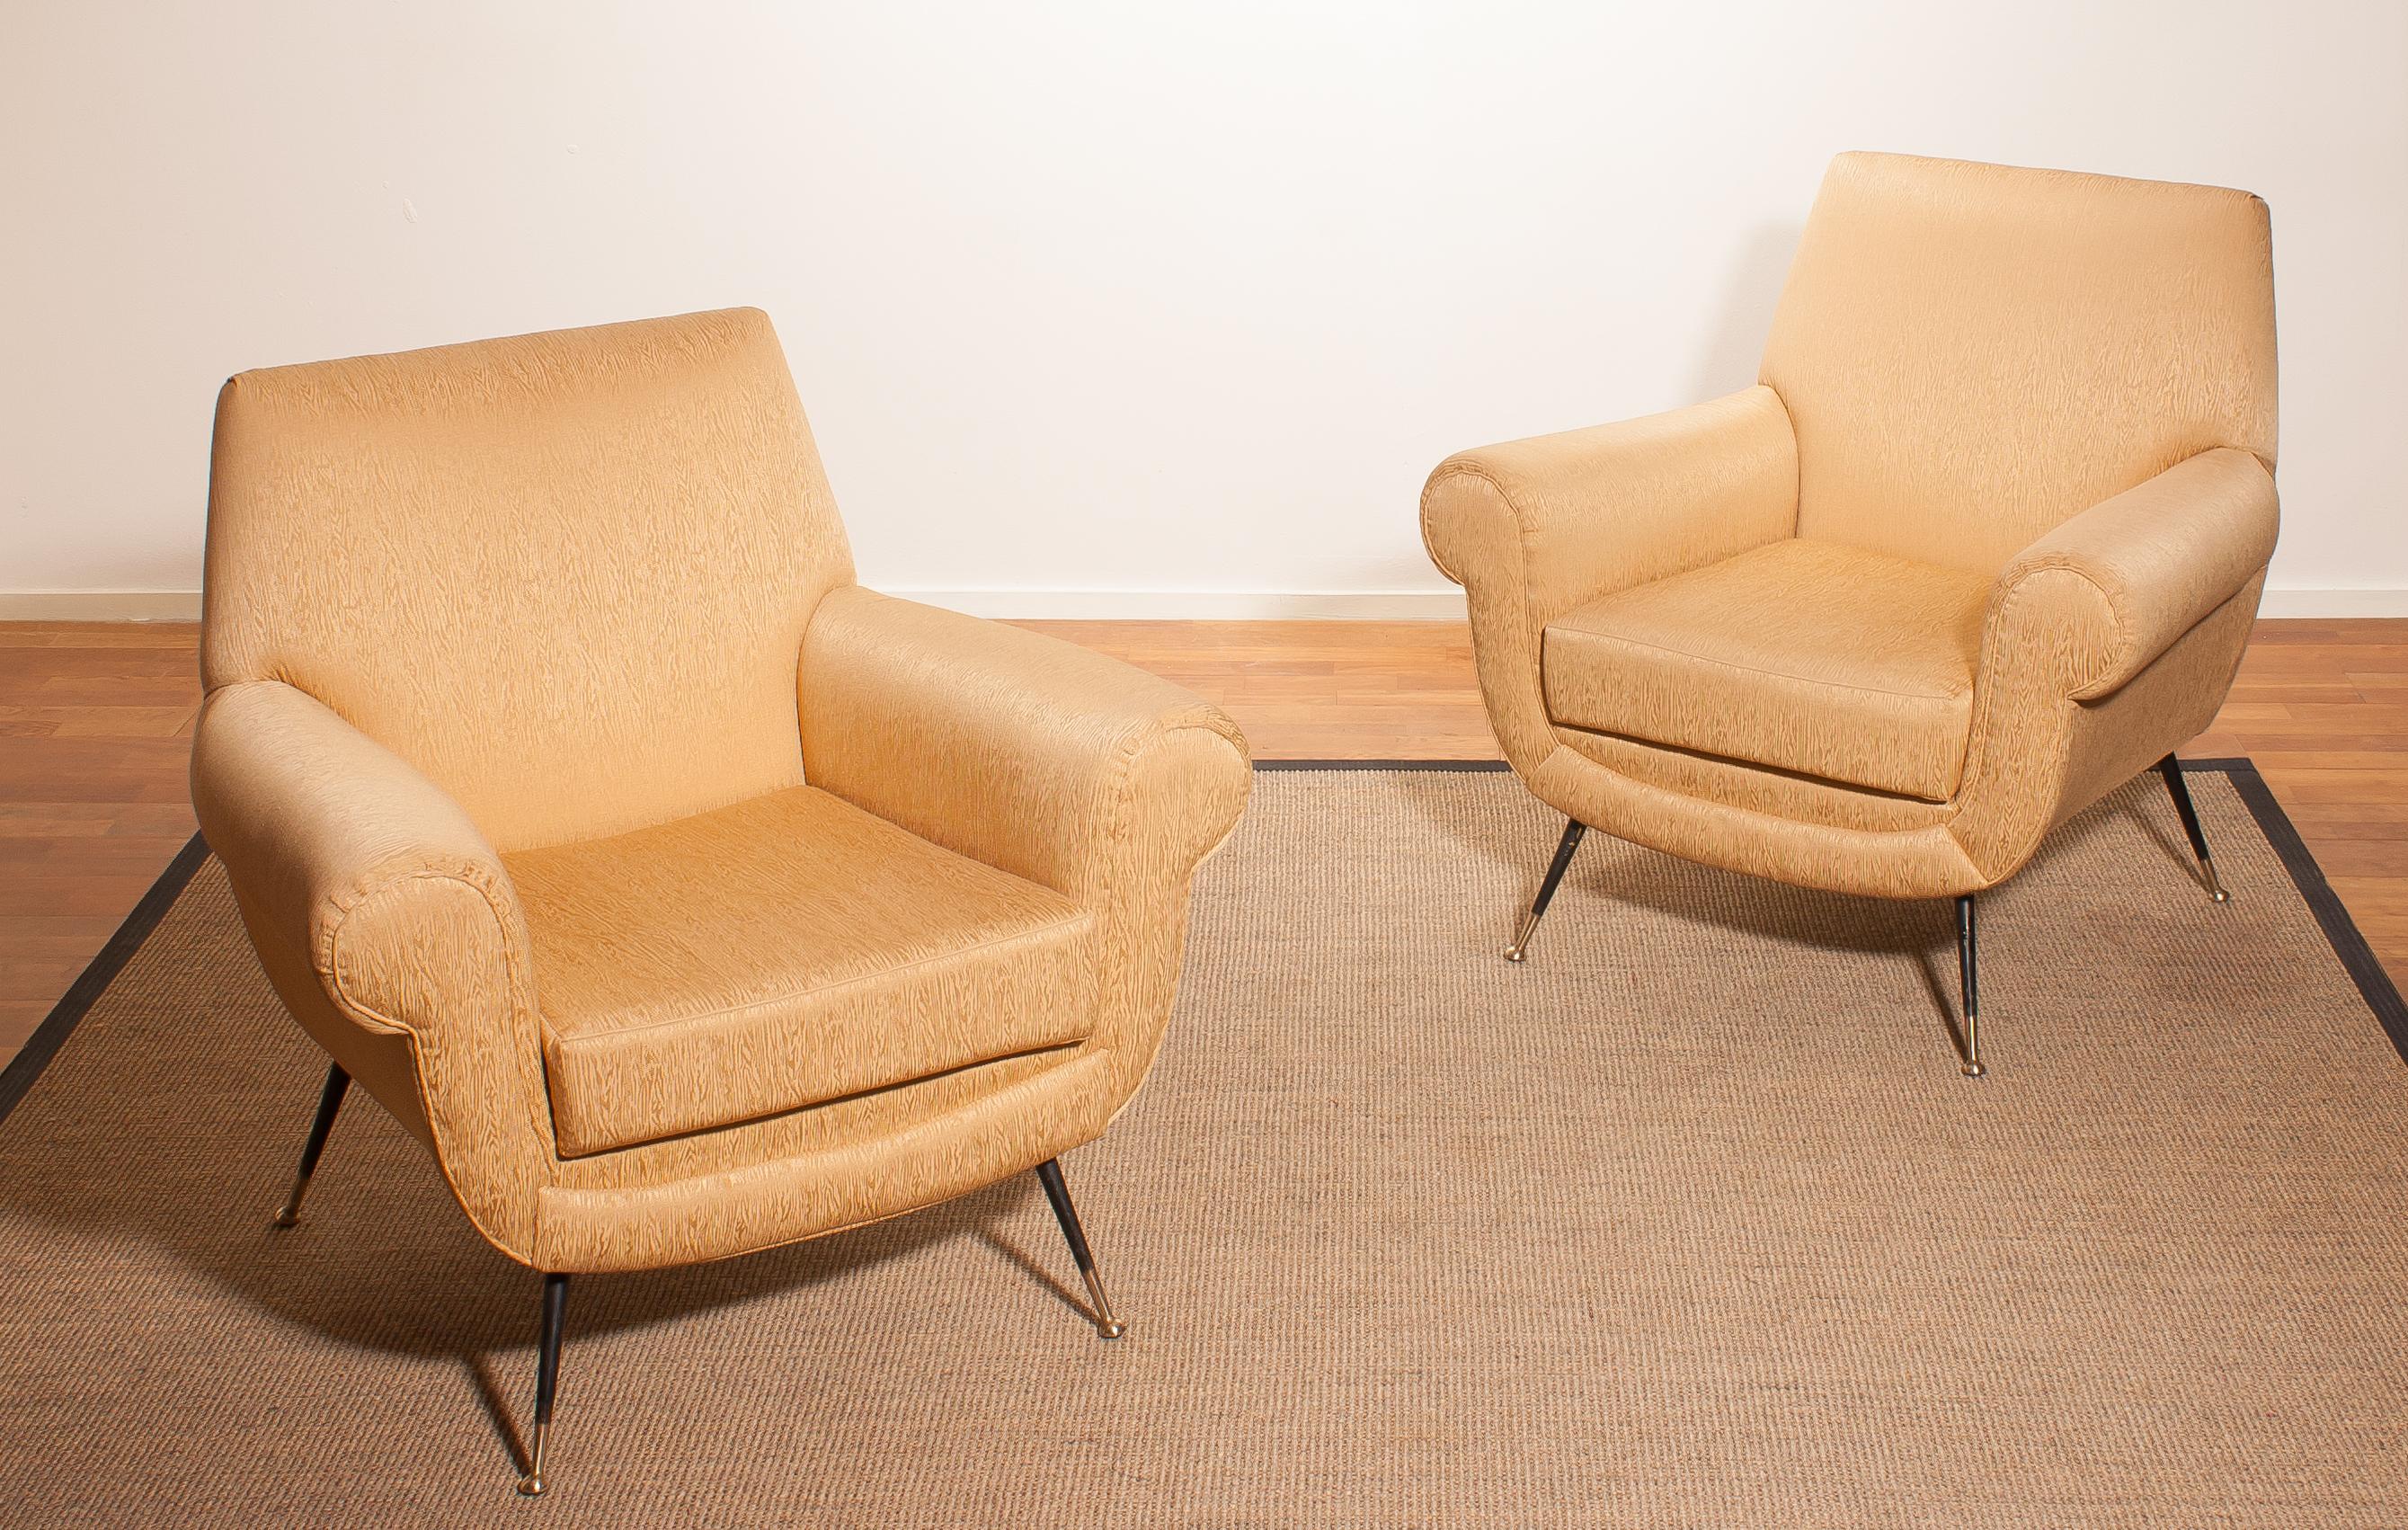 1950s, Brass and Golden Jacquard Set Lounge Chairs by Gigi Radice for Minotti In Good Condition In Silvolde, Gelderland